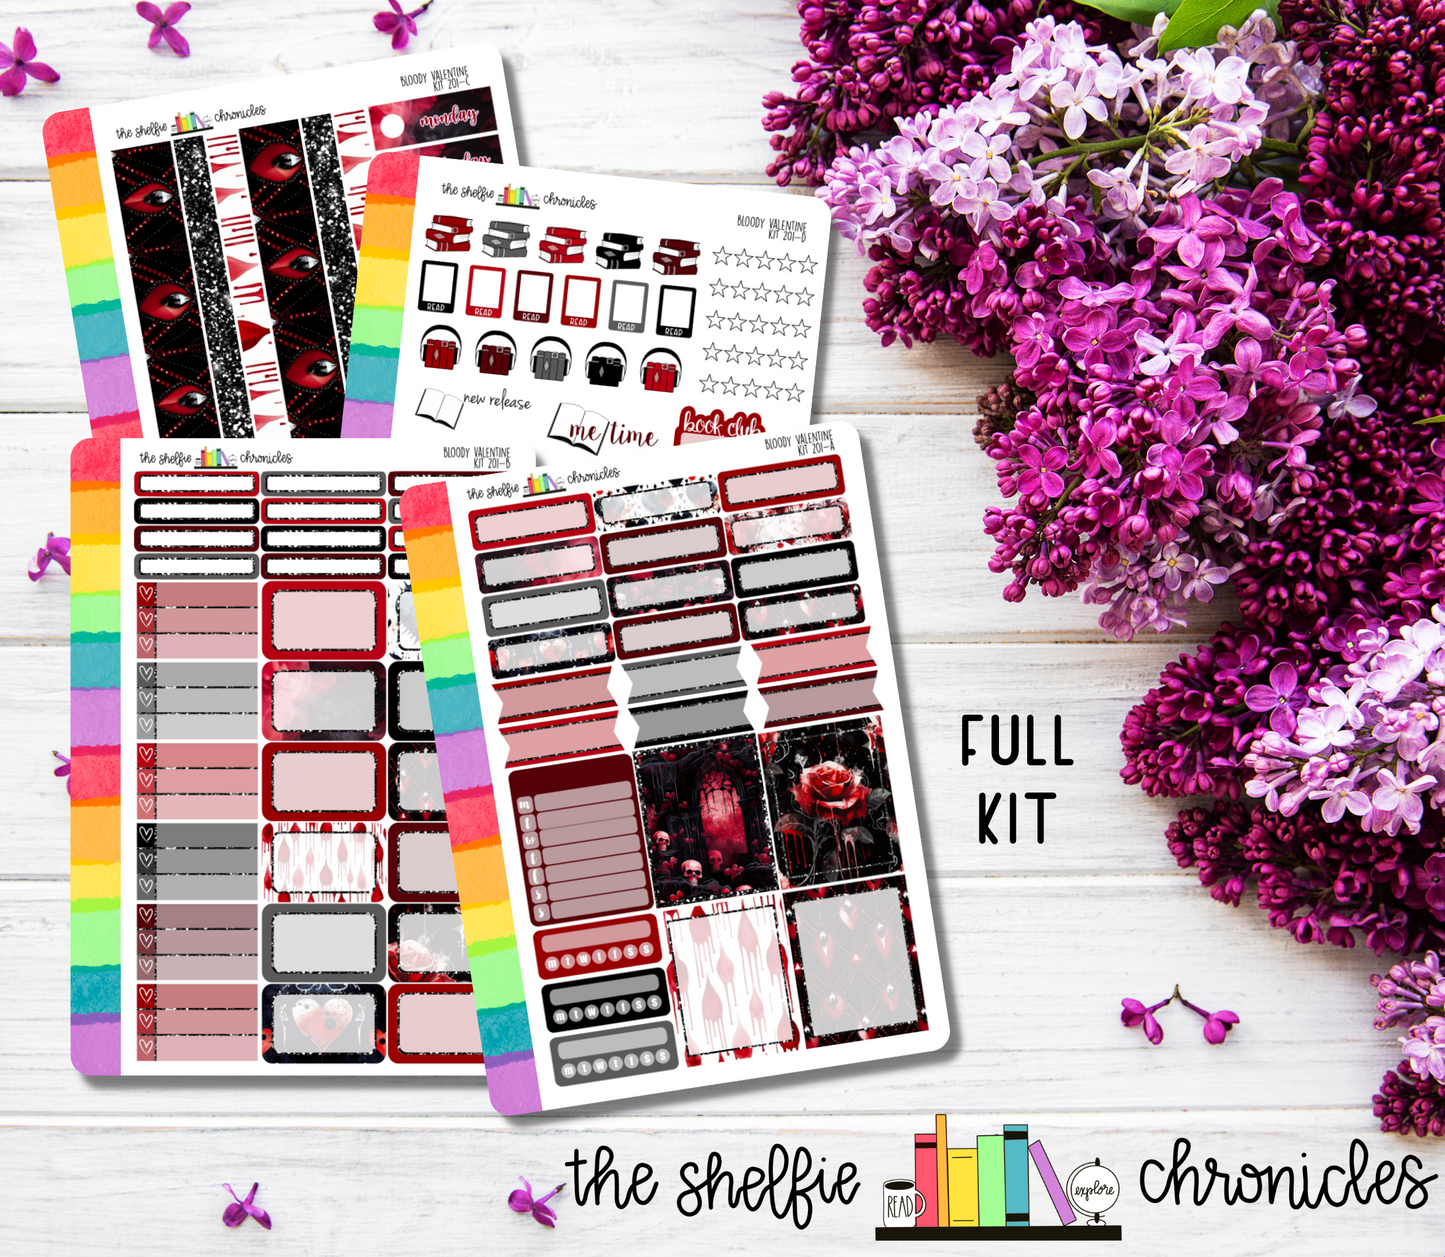 Kit 201 - Bloody Valentine Weekly Kit - Die Cut Stickers - Repositionable Paper - Made To Fit 7x9 Planners